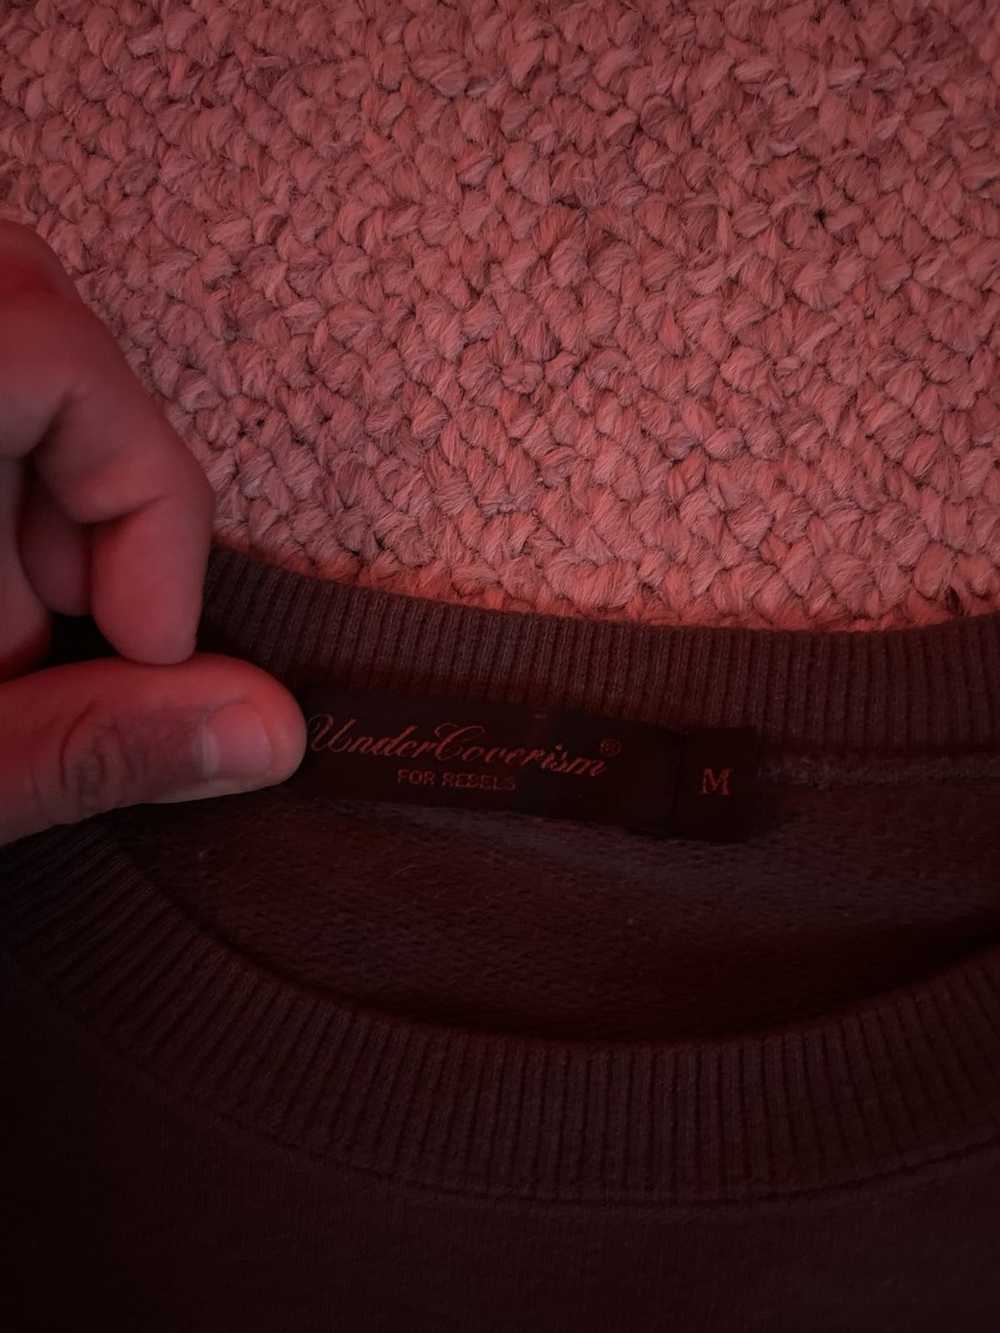 Undercover Undercover aw02 Velcro cross sweater - image 3